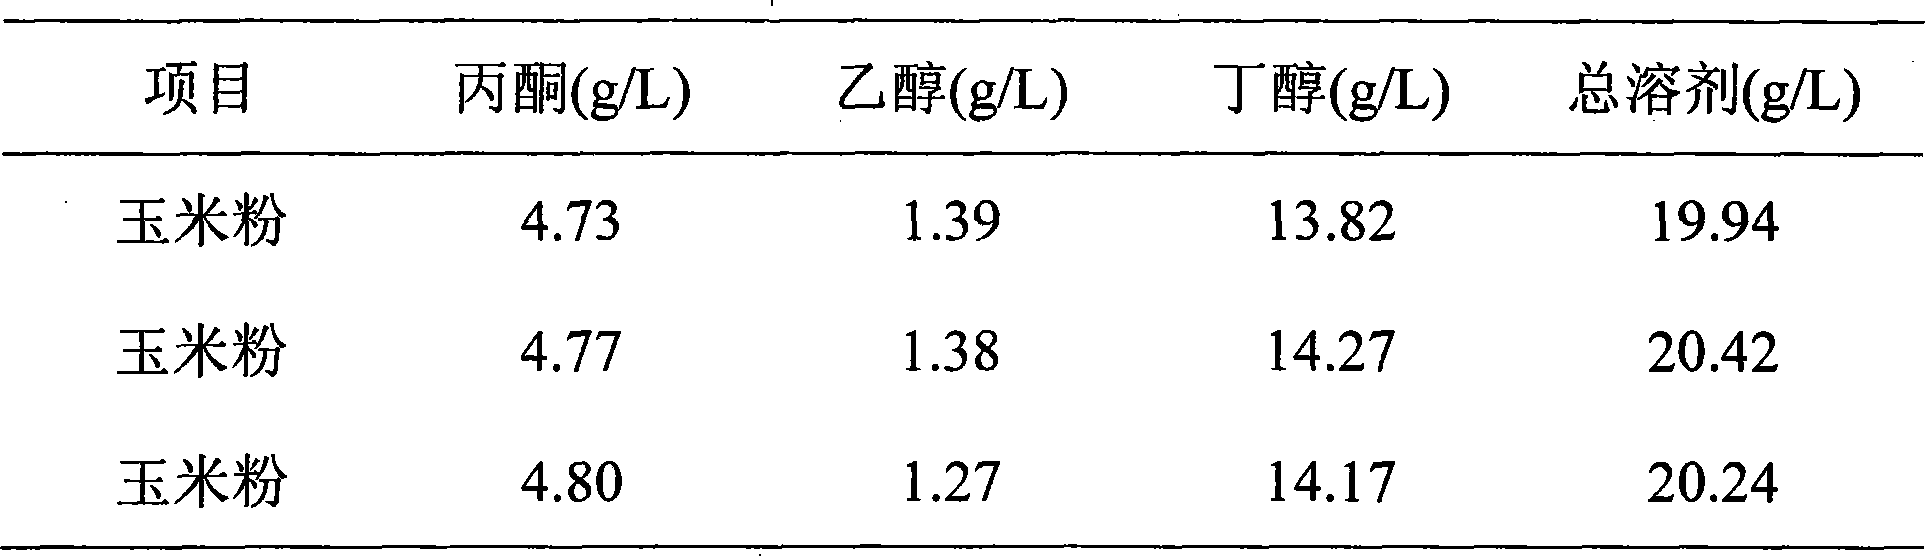 Method for improving yield of acetone, butanol and ethanol produced by fermentation of manioc materials